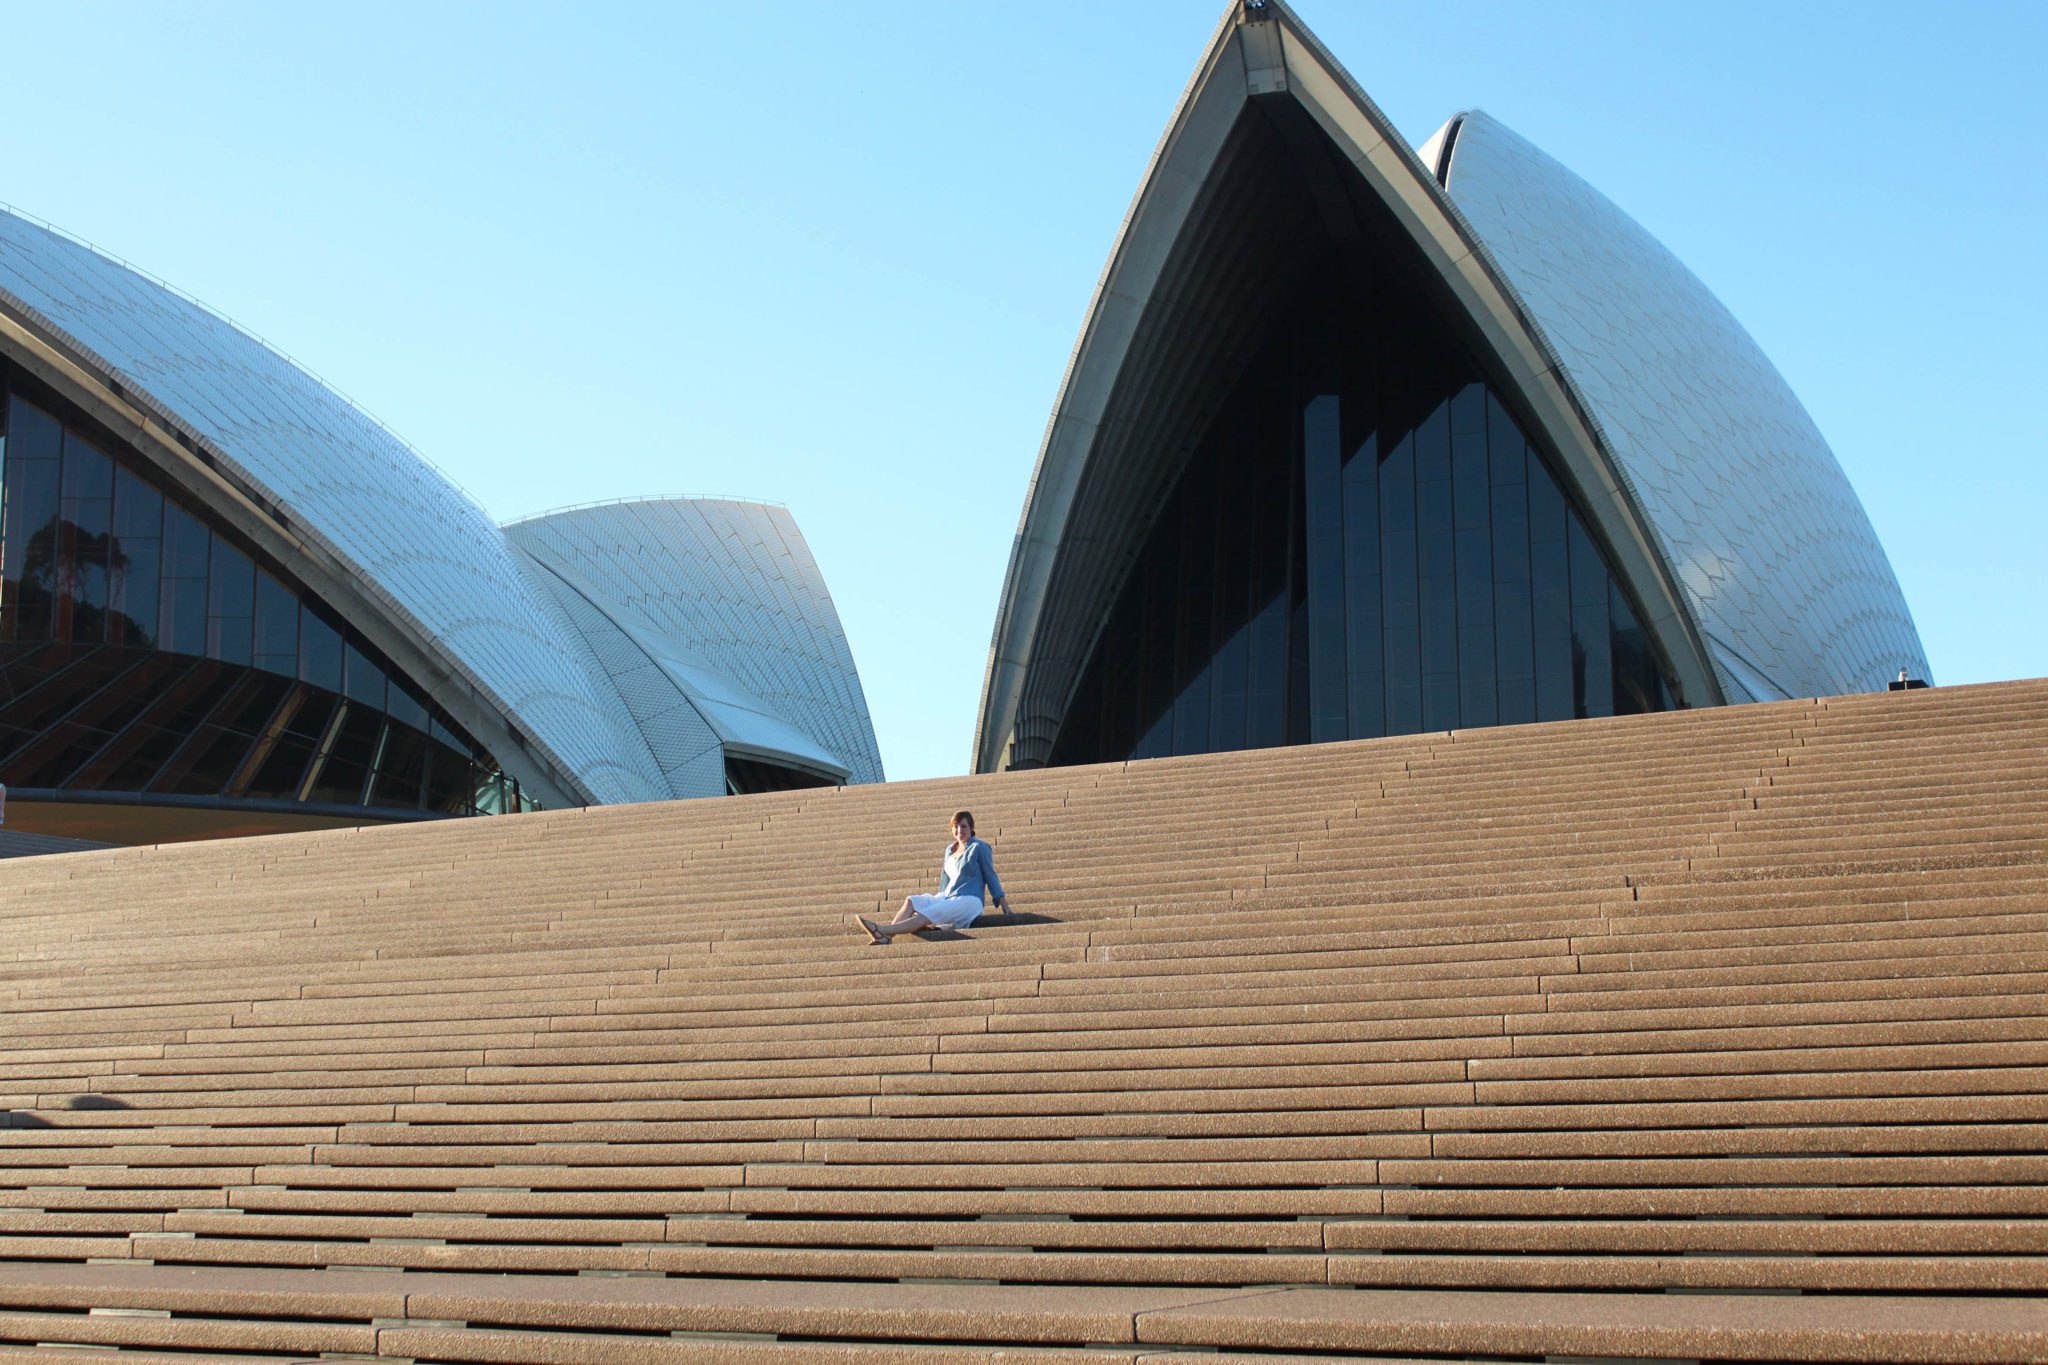 Tips for visiting the Sydney Opera House- Top 10 things to do in Sydney #sydney #australia #sydneyoperahouse #simplywander